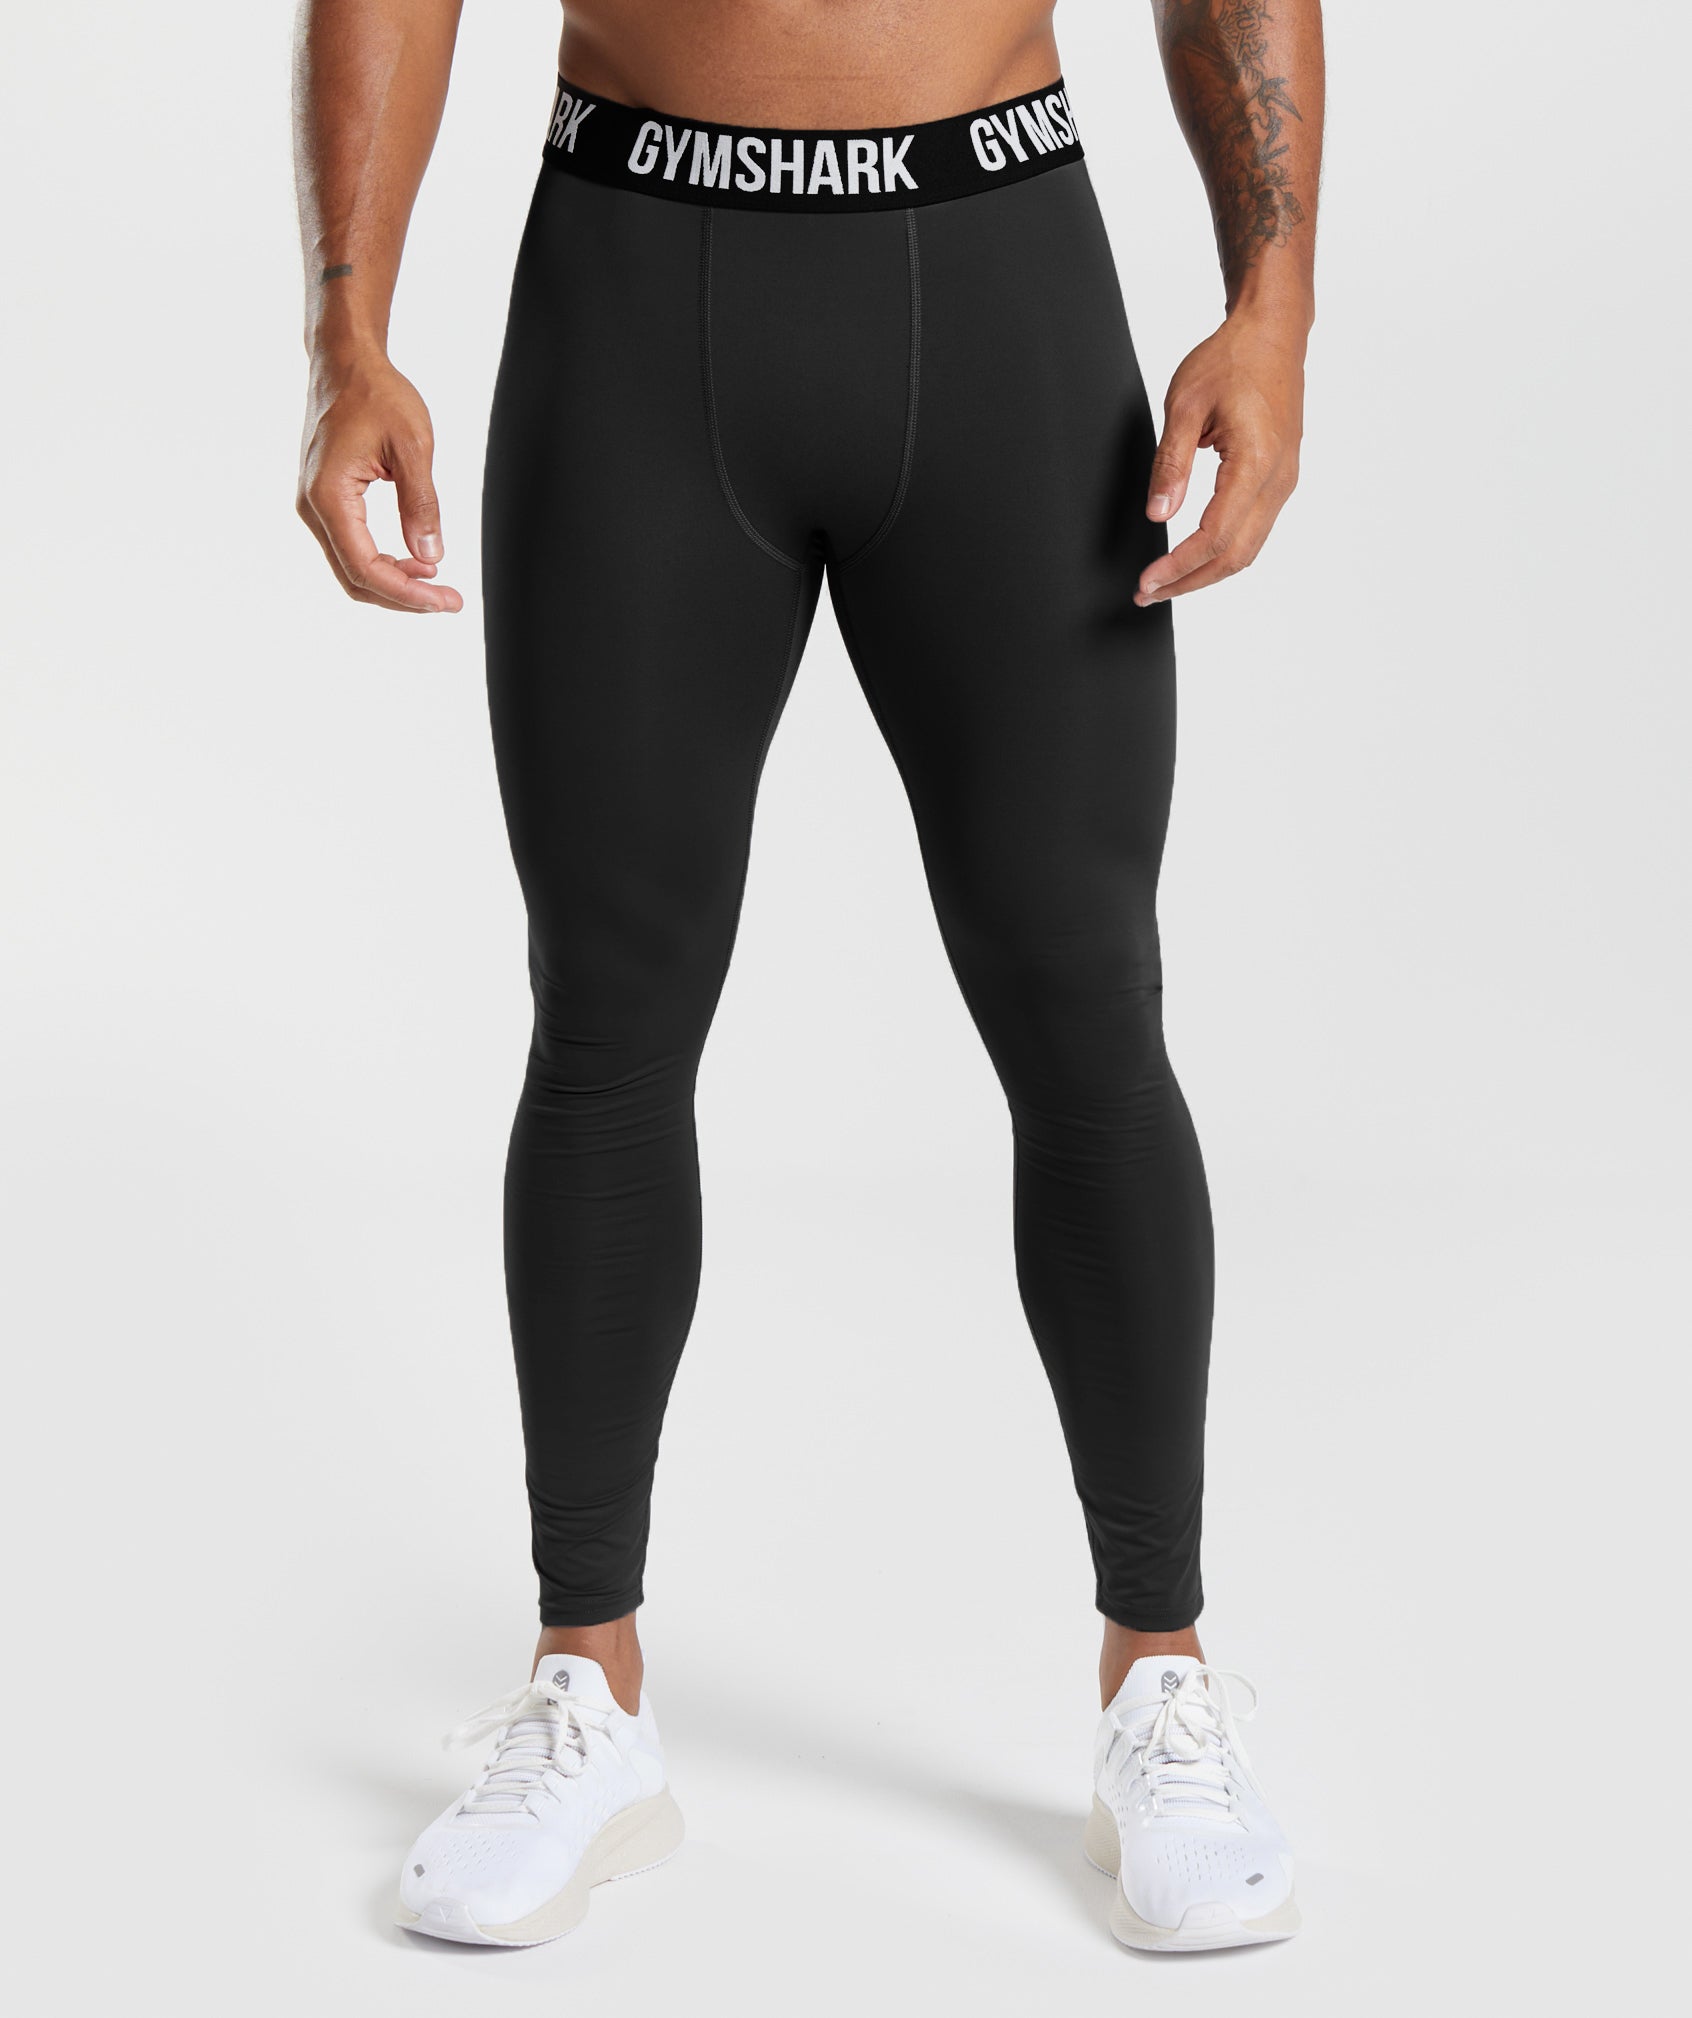 Compression Pants & Leggings: Ultra-Tight Fit